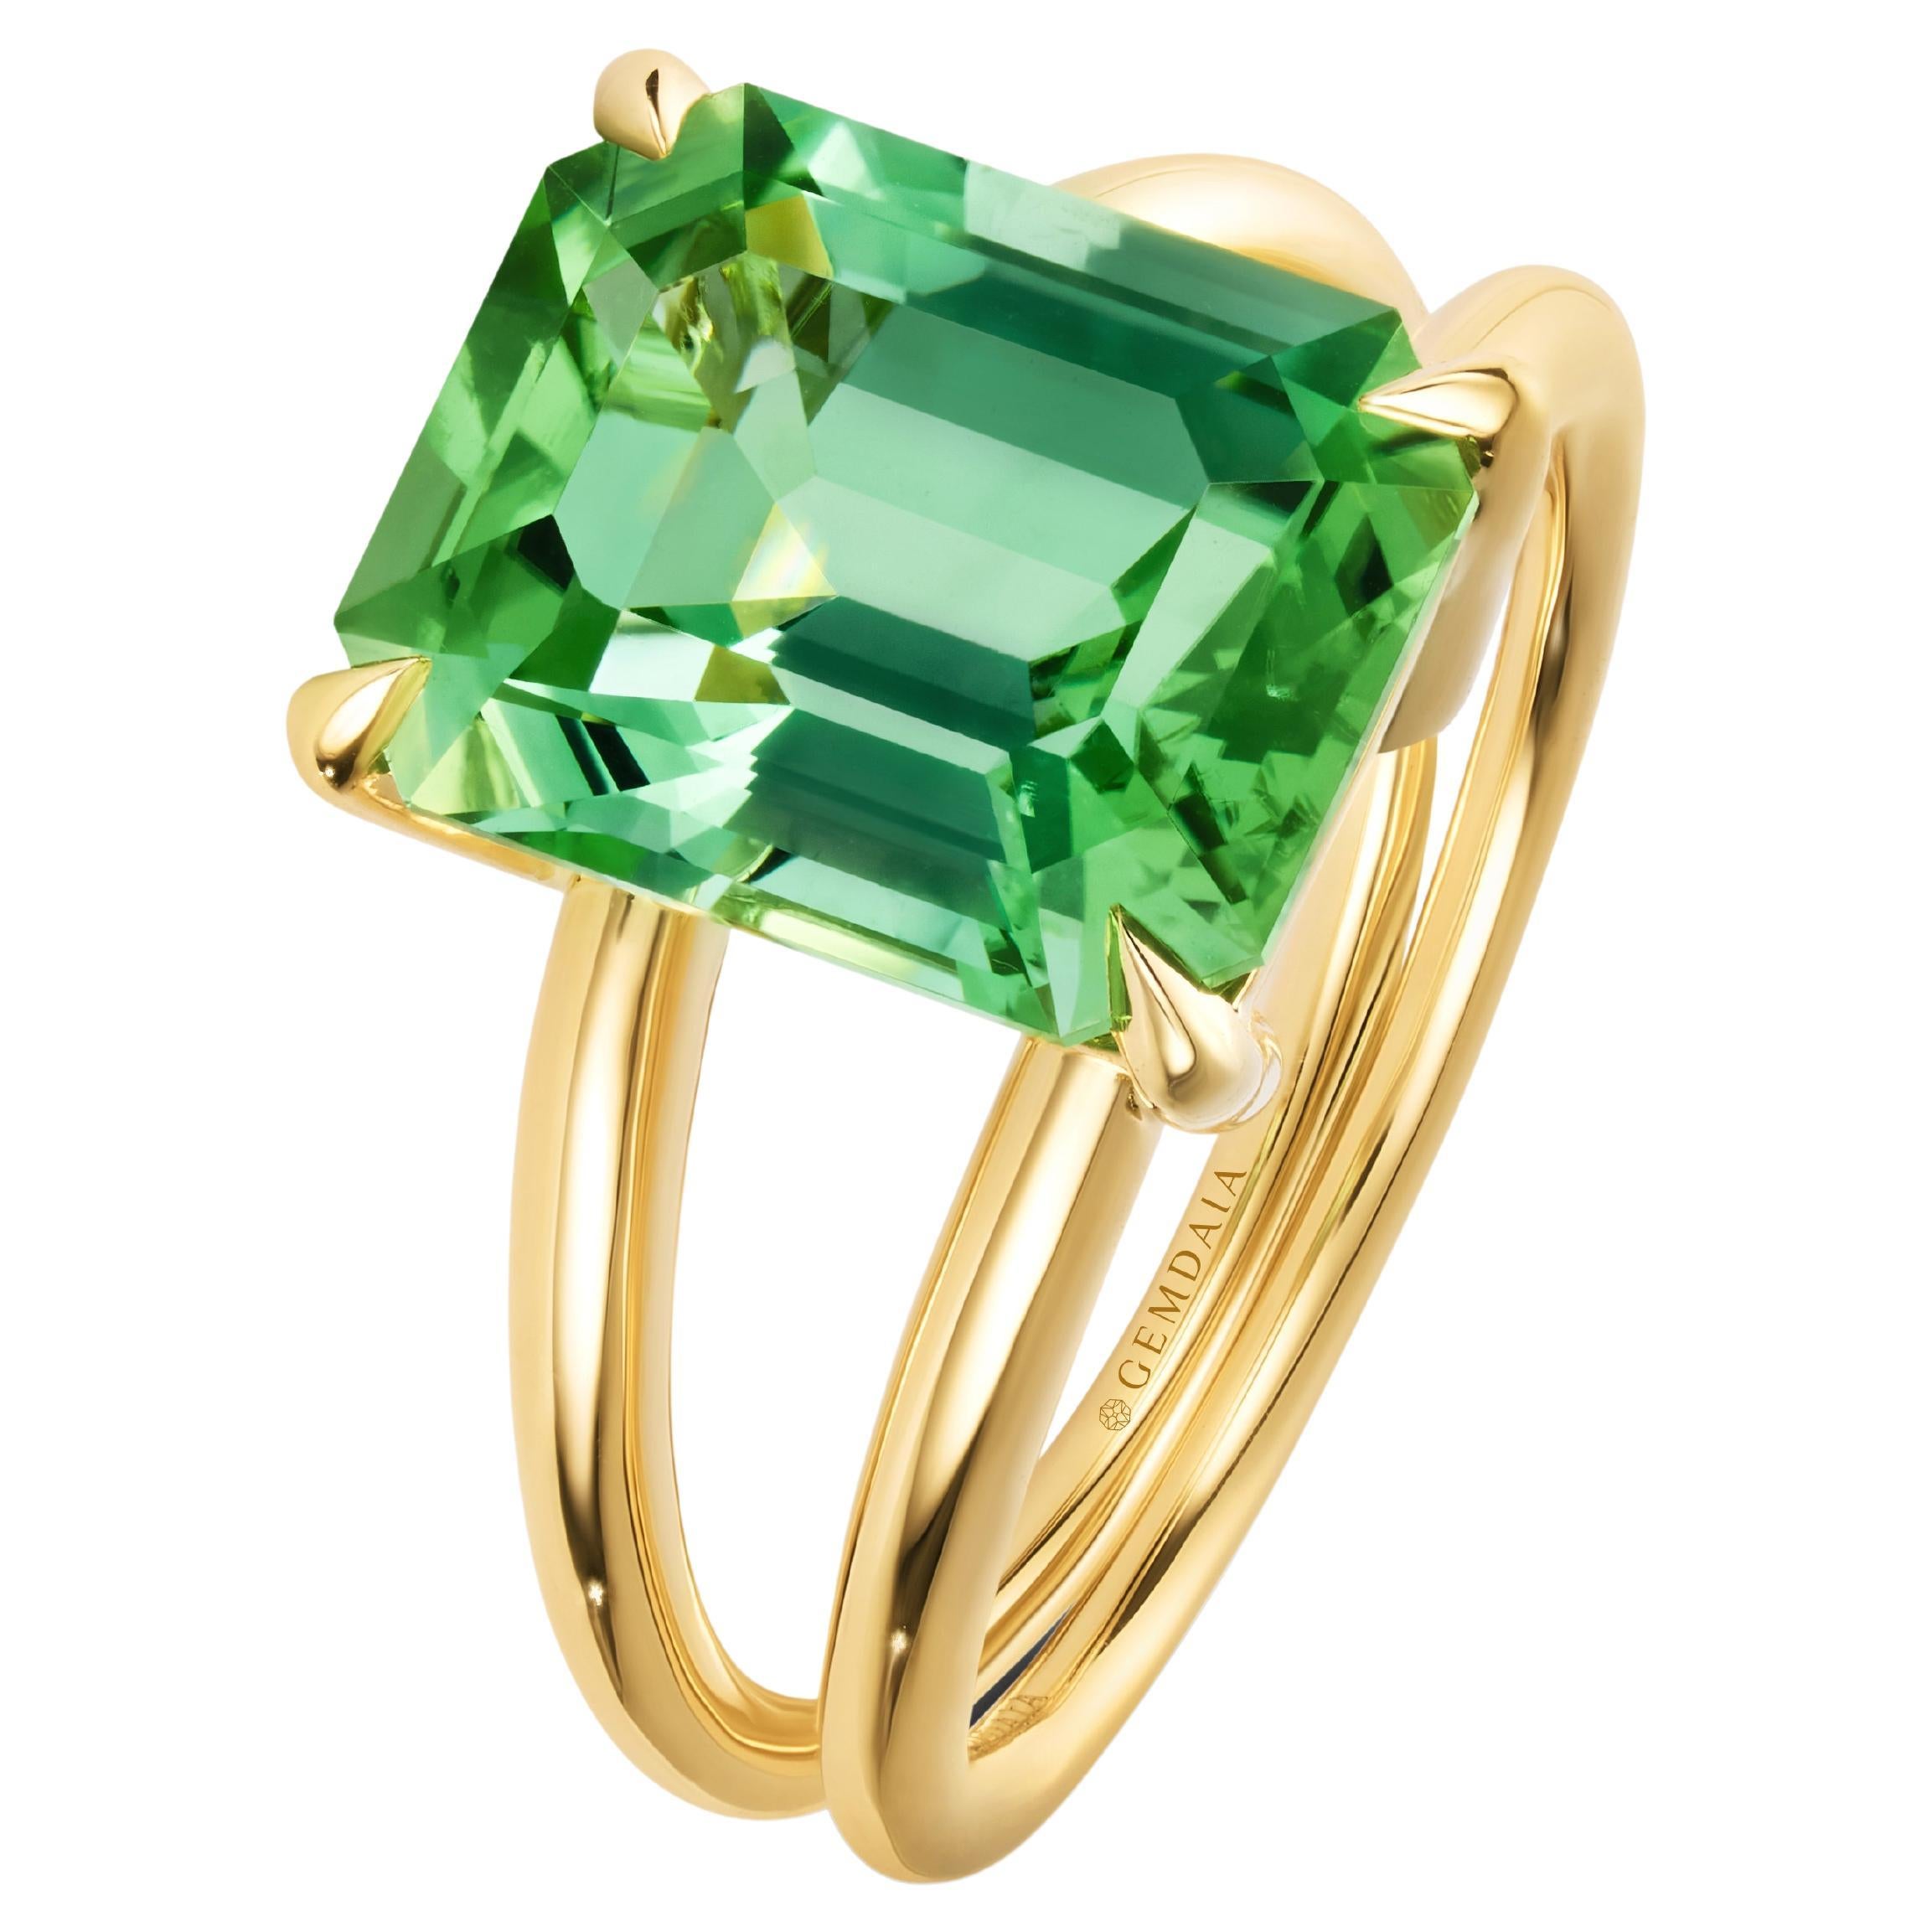 Emerald Cut Certified 5.30 Carat Neon Green Lagoon Tourmaline Cocktail Ring For Sale